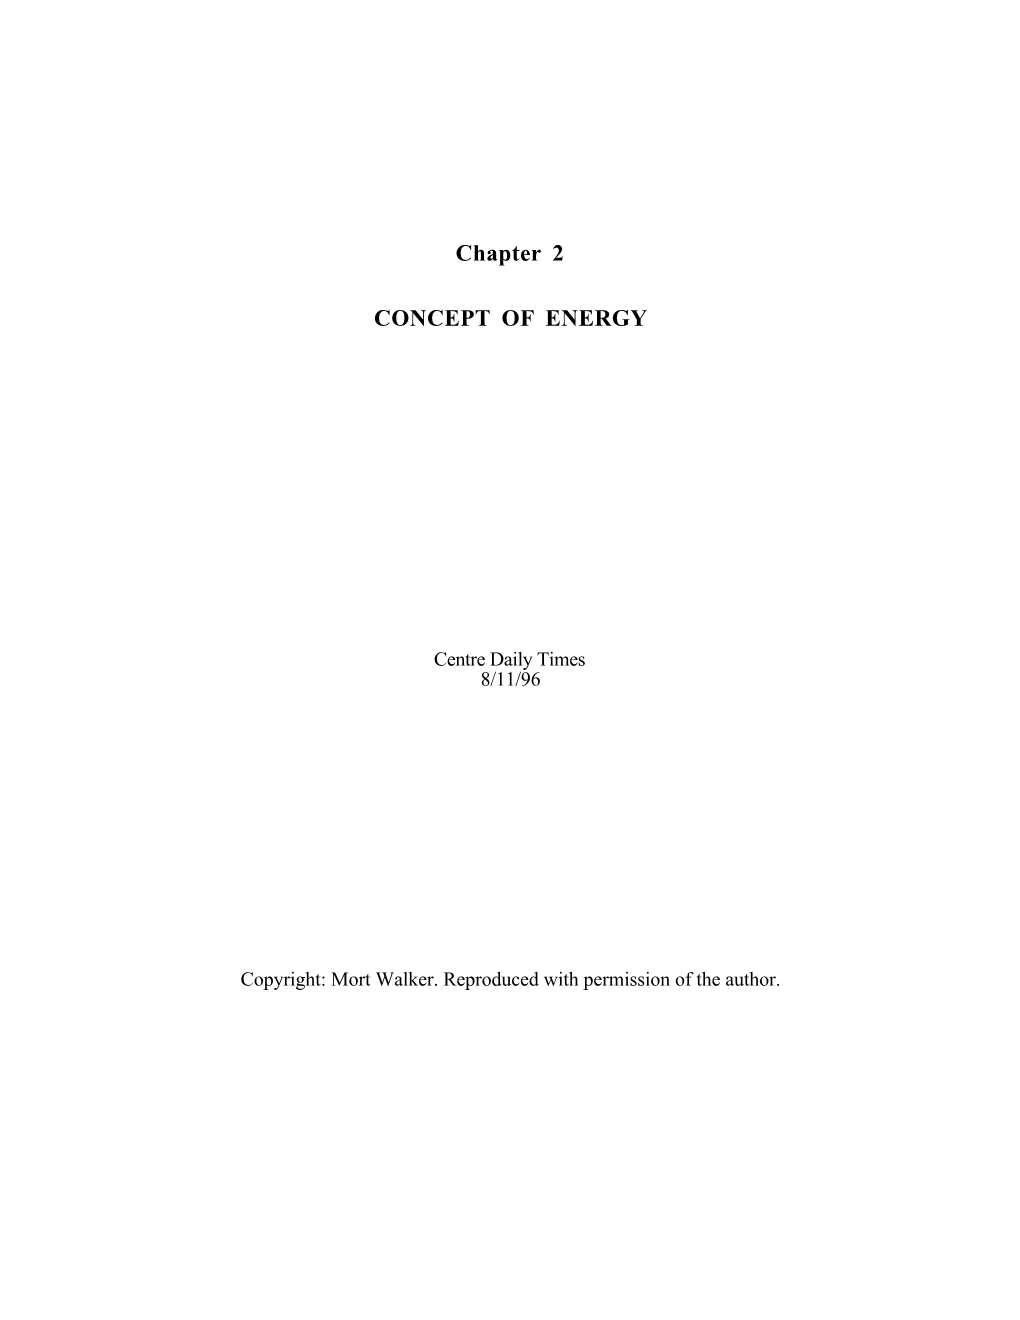 Chapter 2 CONCEPT of ENERGY